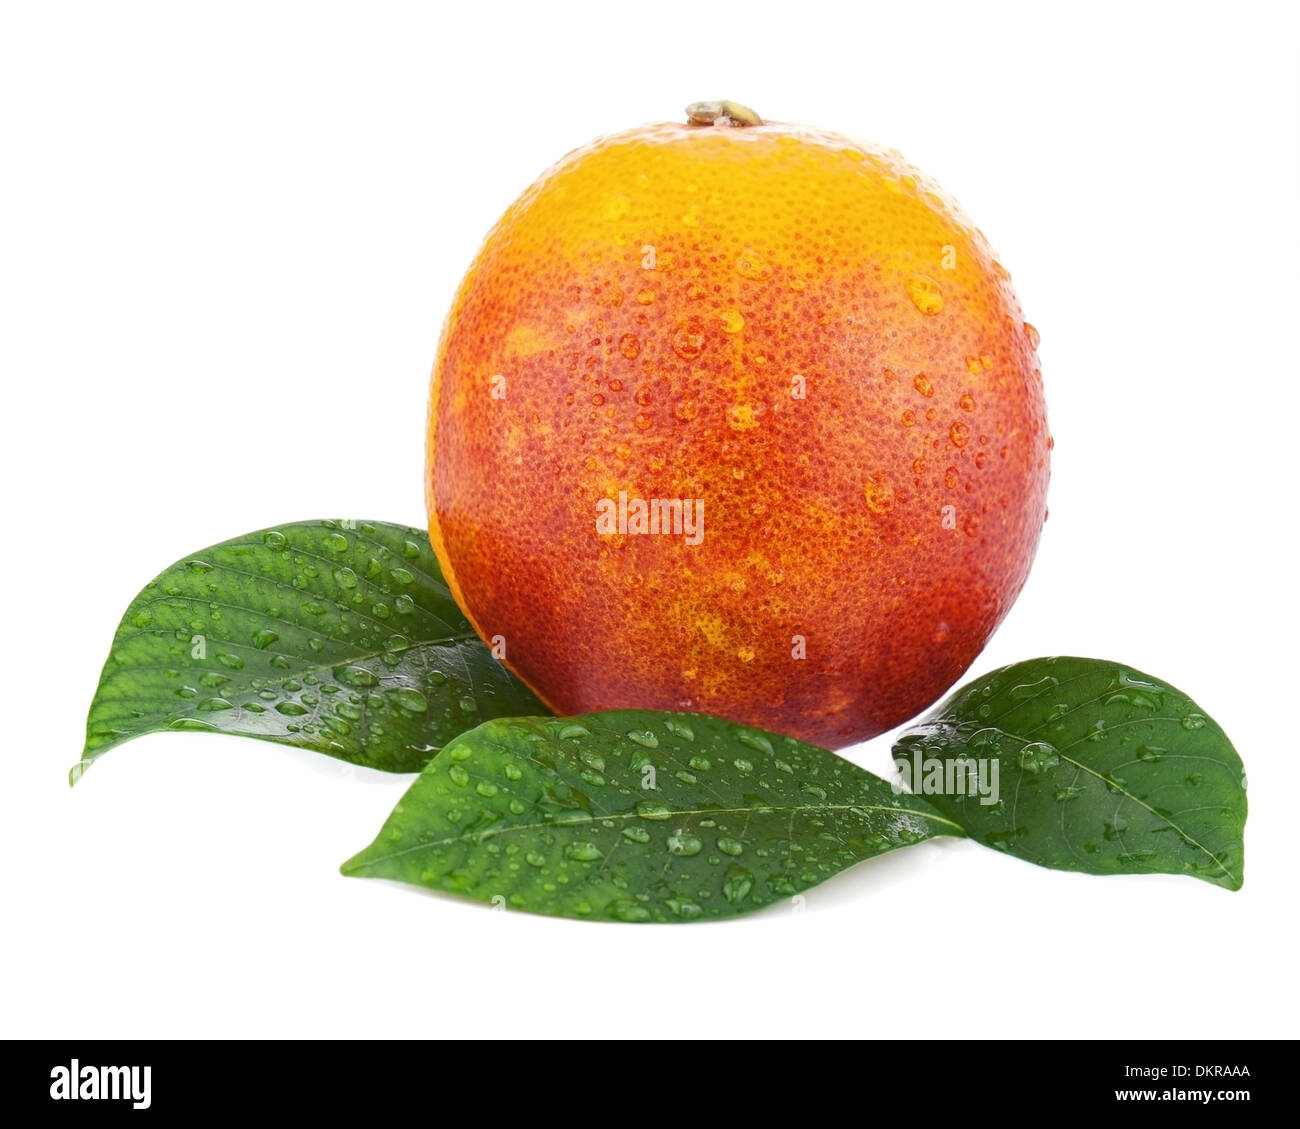 Ripe red blood oranges with green leaves isolated on white background. Closeup. Stock Photo